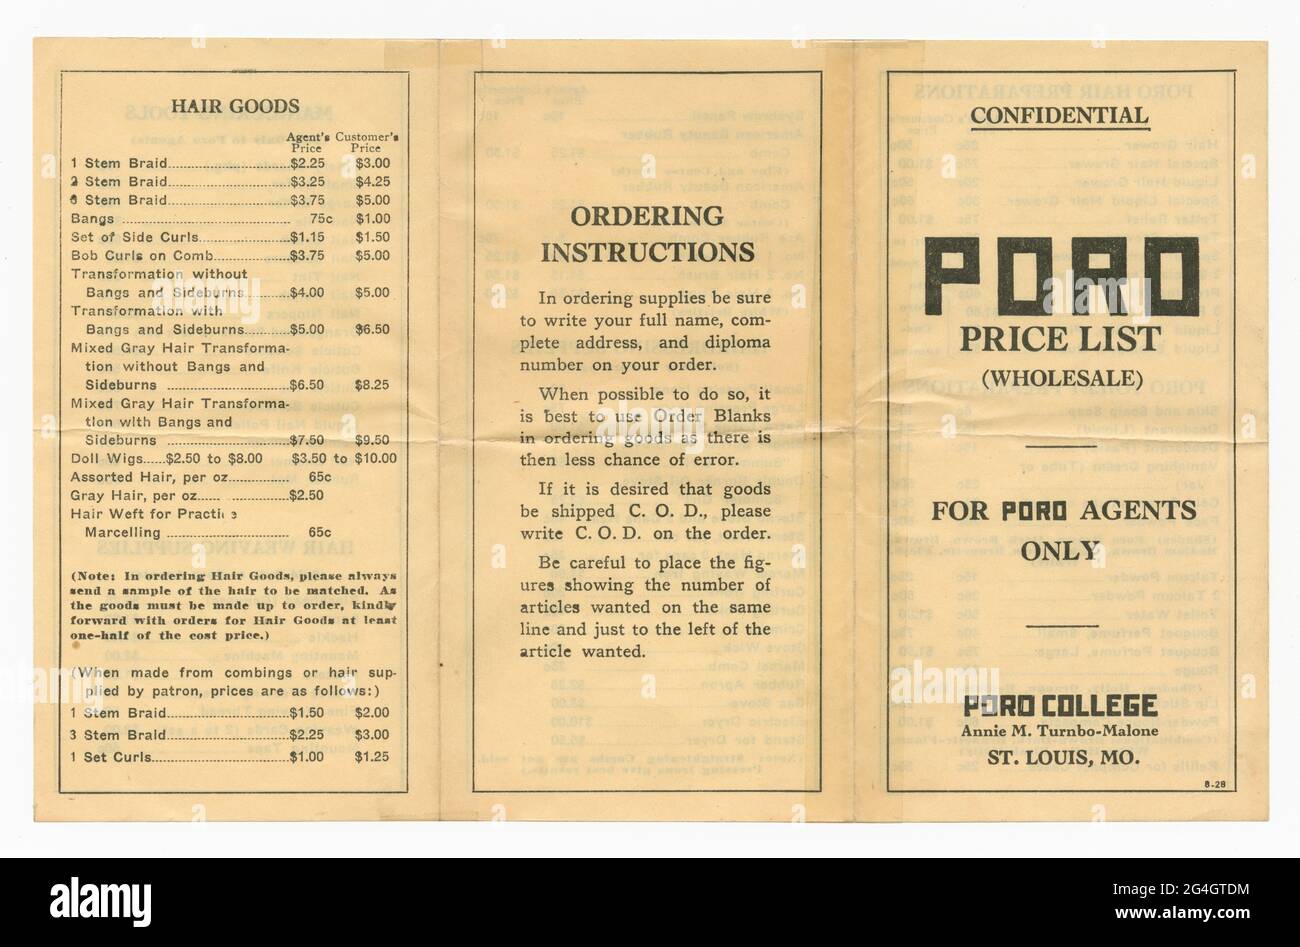 Poro College, a cosmetology school and centre, was established in 1918 by Annie Turnbo Malone, an African-American businesswoman, inventor and philanthropist. This is a confidential Poro Price List pamphlet for Poro dealers. The pamphlet is black type on cream colored paper, folded in thirds. The front cover has the text contained within a rectangle over the whole of the front. At the top is underlined text that reads &quot;CONFIDENTIAL.&quot; In the upper third is the title of the pamphlet &quot;PORO/ PRICE LIST/ (WHOLESALE).&quot; In the lower half are two lines of text contained within two Stock Photo